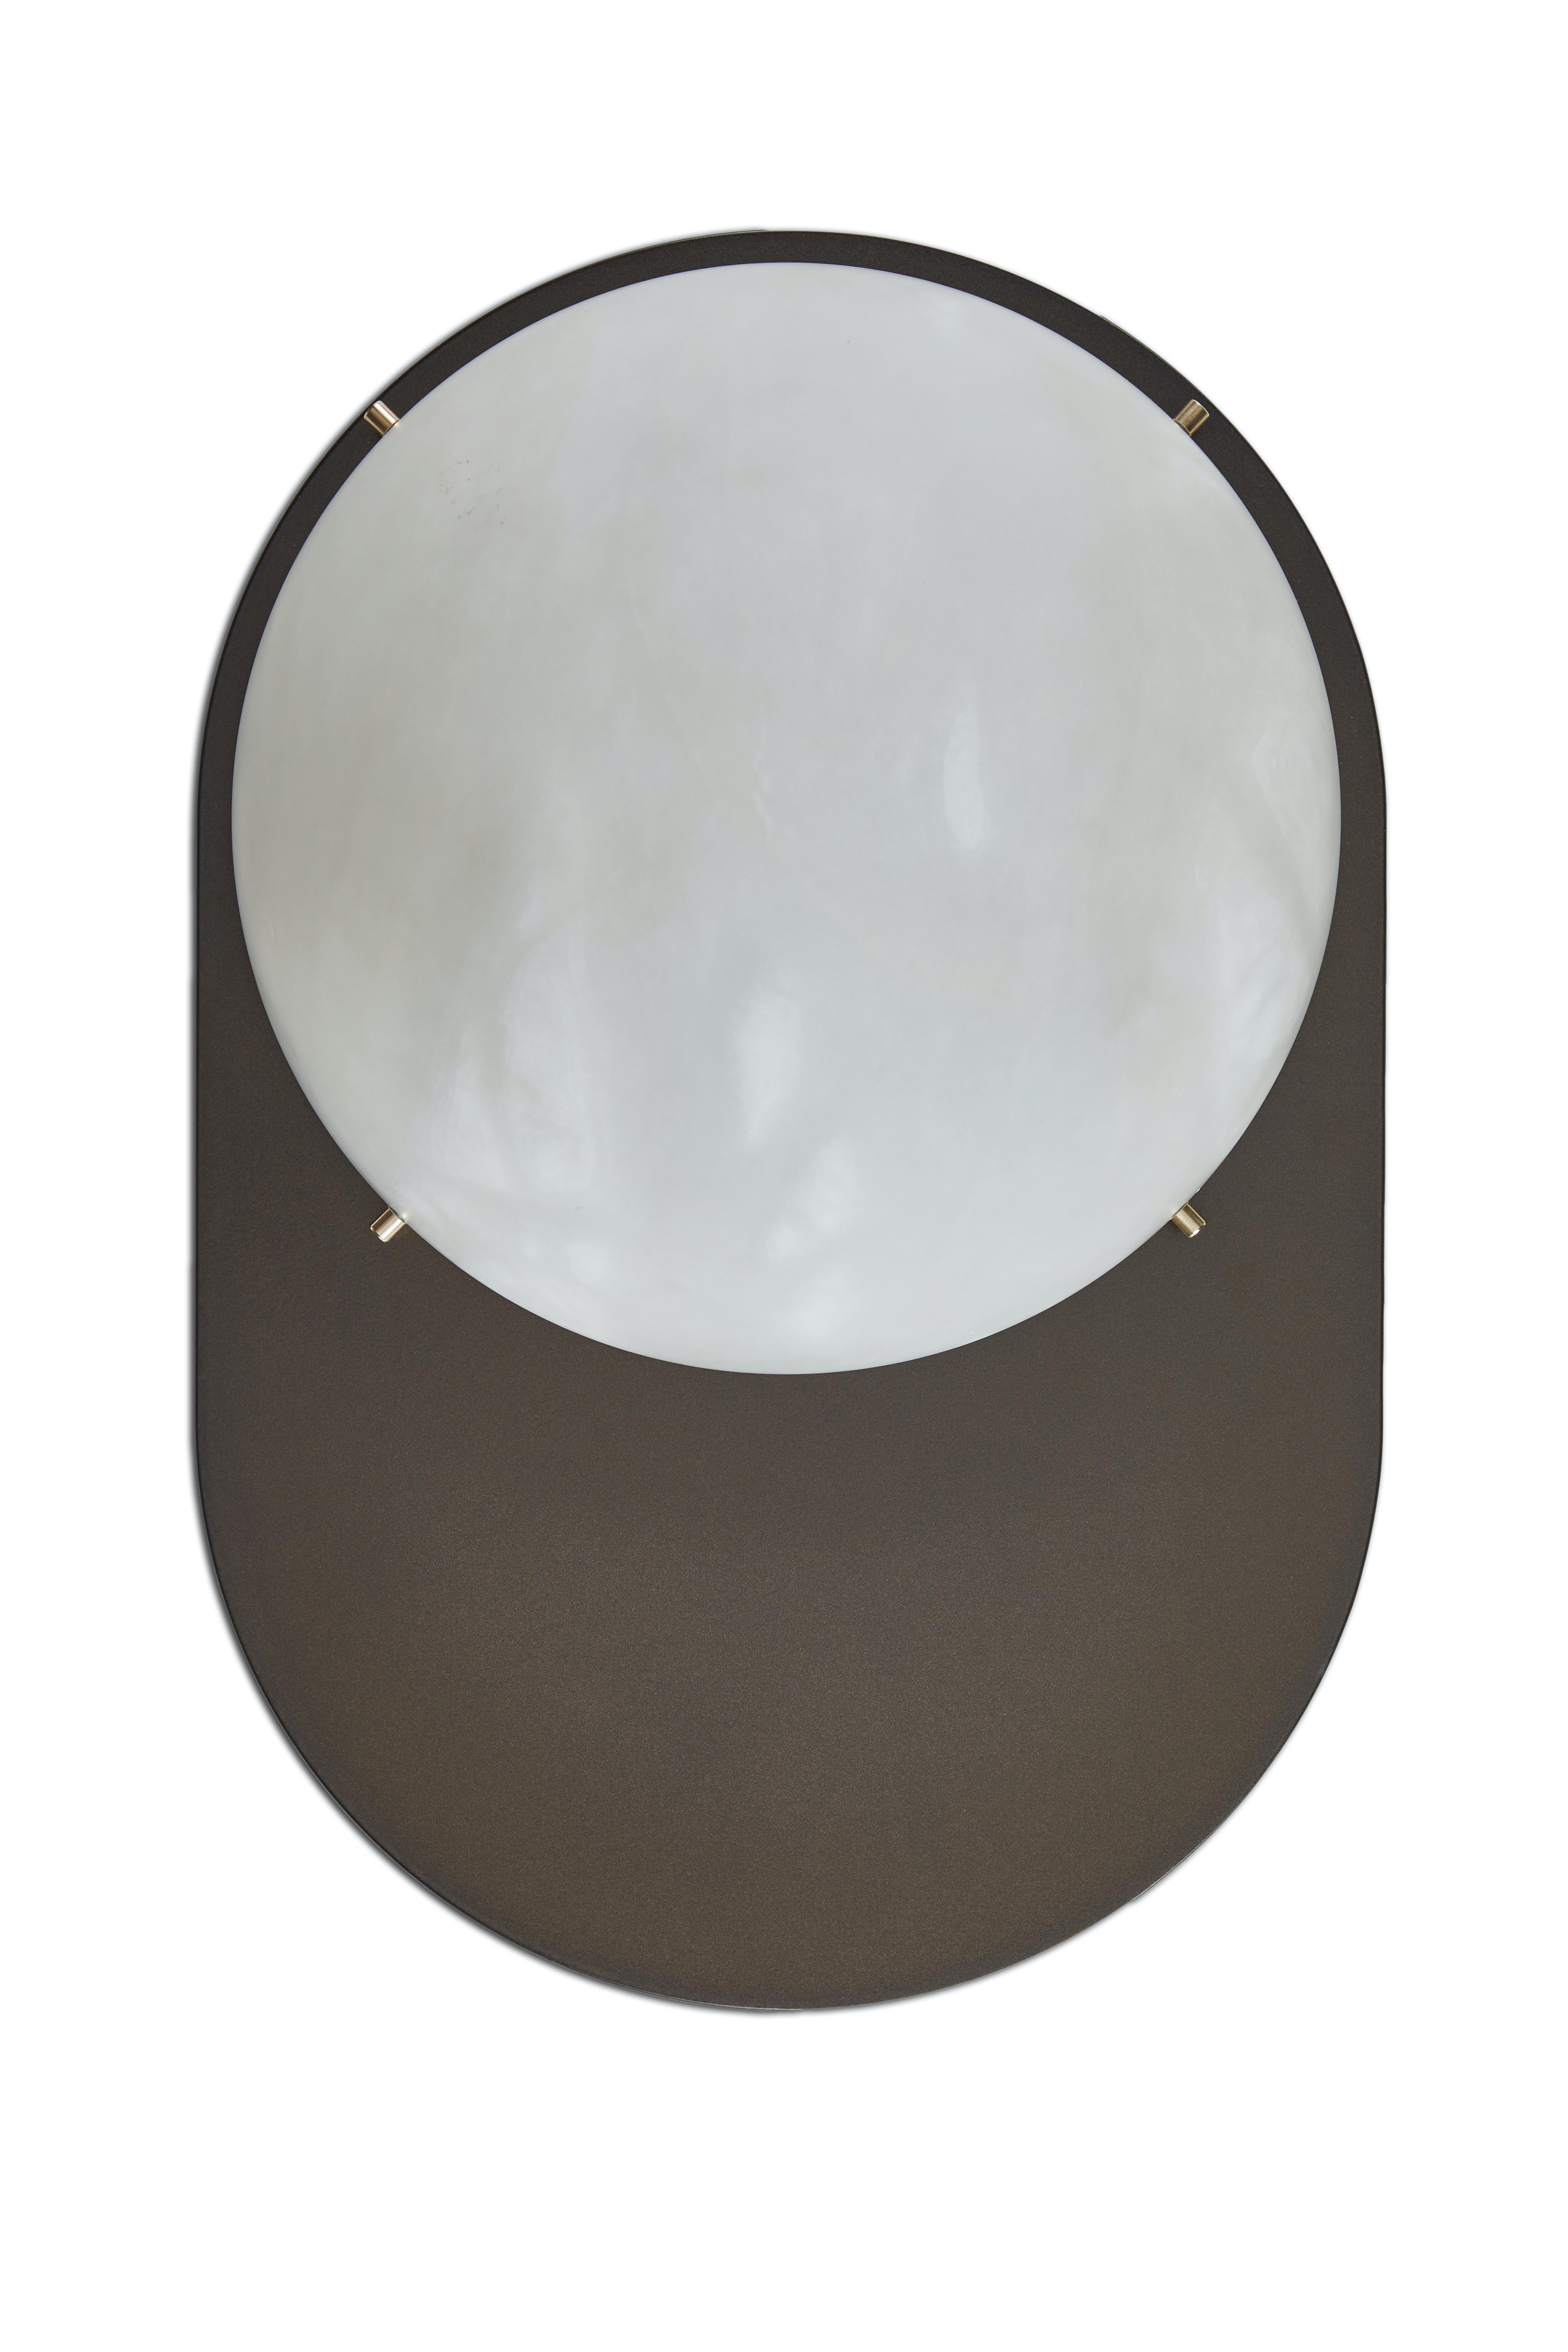 Large 'Toogle' sconce in bronzed steel and alabaster. Handcrafted in Los Angeles in the workshop of noted French designer and antiques dealer Denis de le Mesiere, who fabricates his highly refined original designs with scrupulous attention to detail